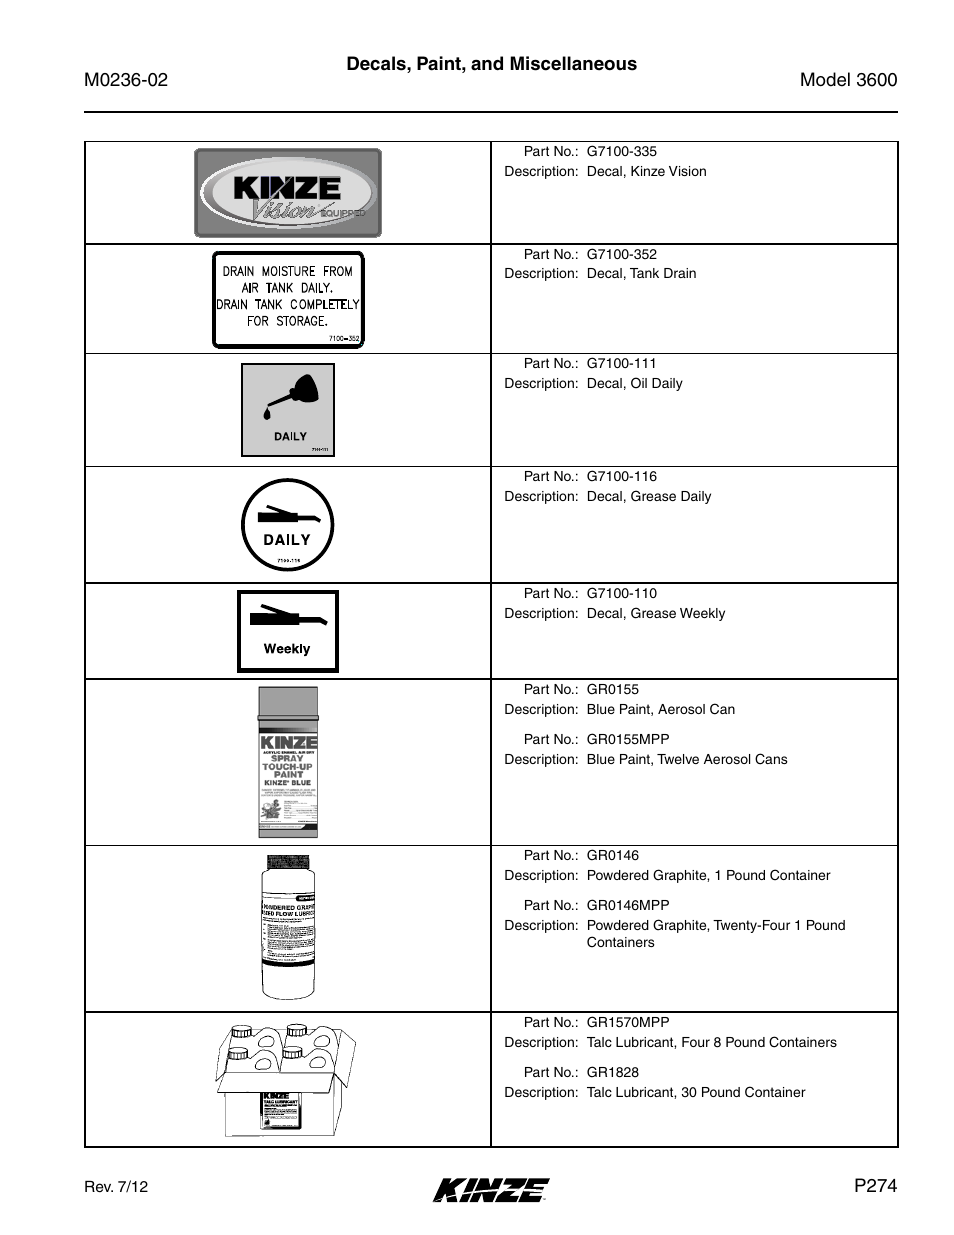 Decals, paint, and miscellaneous, P274 | Kinze 3600 Lift and Rotate Planter Rev. 5/14 User Manual | Page 277 / 302